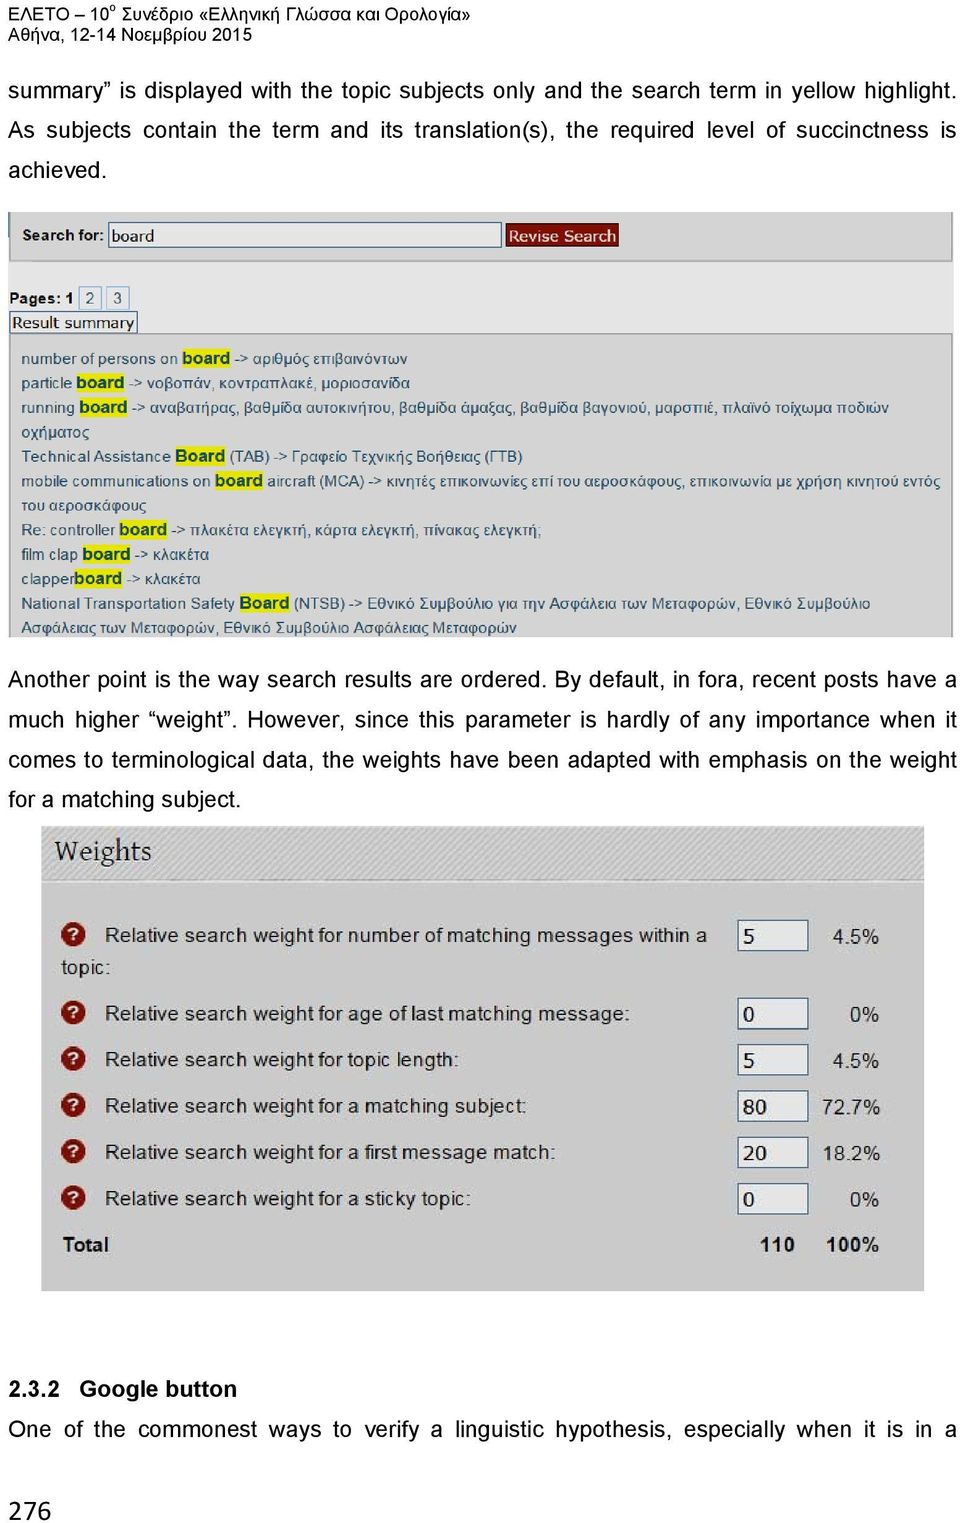 Another point is the way search results are ordered. By default, in fora, recent posts have a much higher weight.